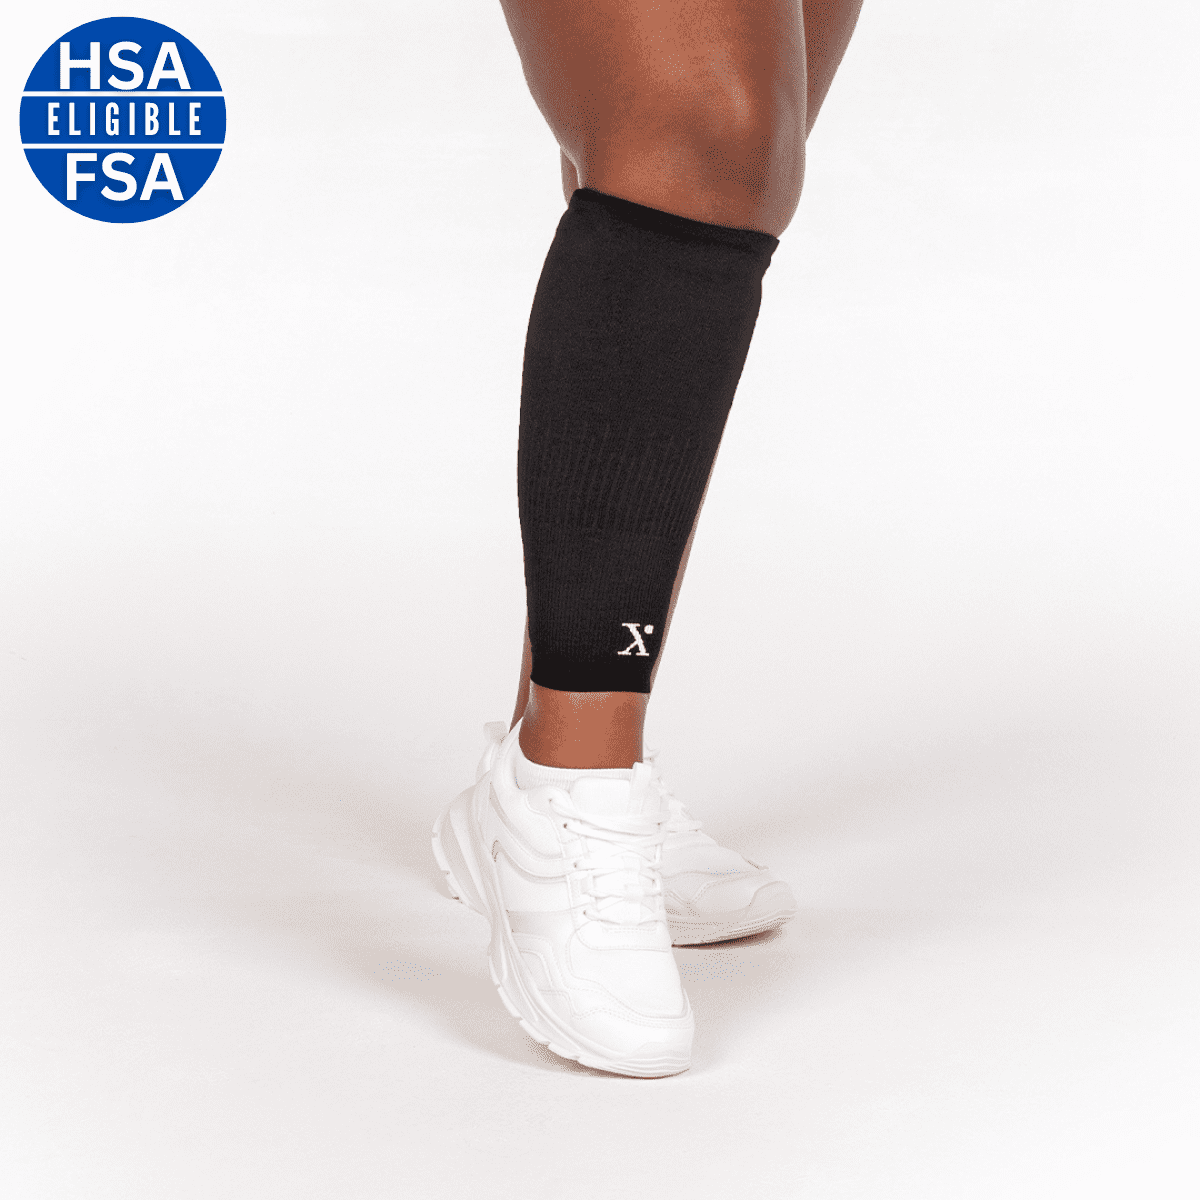 Nufabrx Pain Relieving Compression Calf Sleeve for Men and Women -